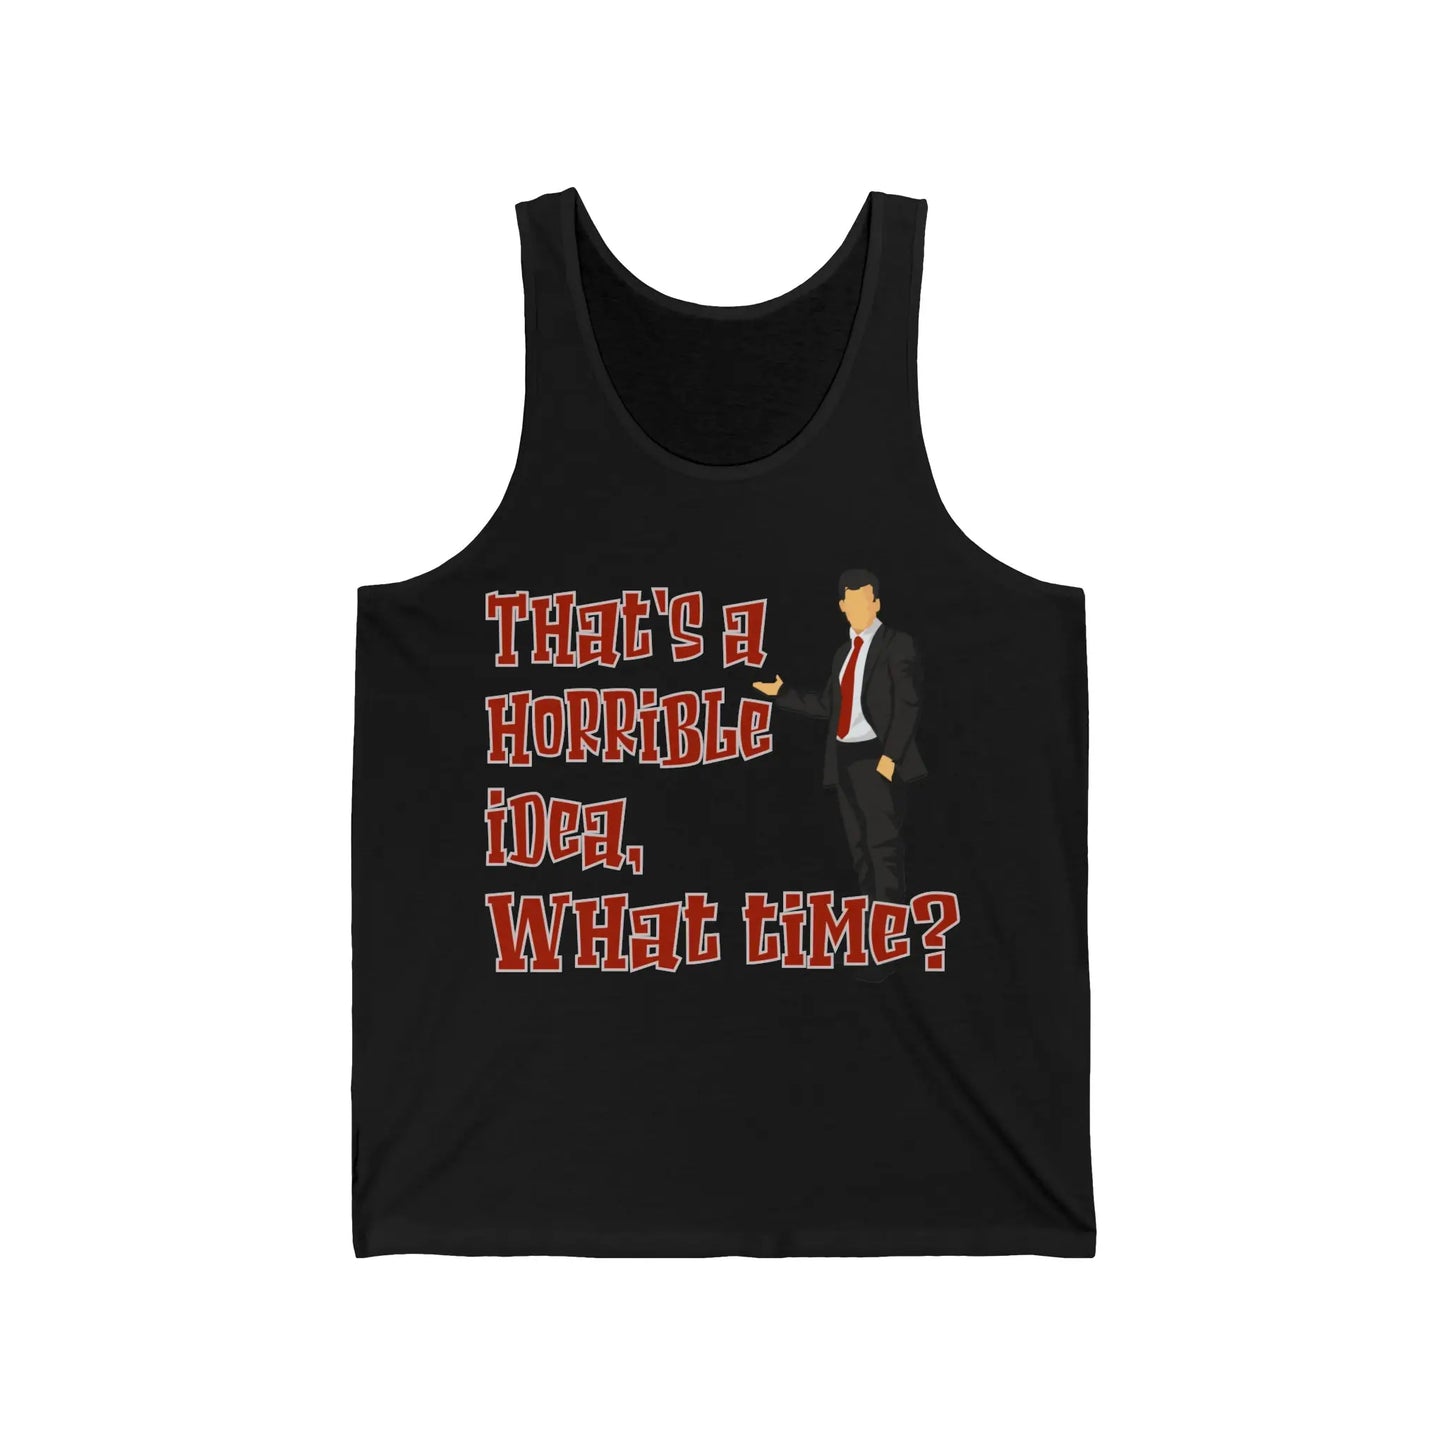 That's A Horrible Idea What Time Men's Jersey Tank - Wicked Tees